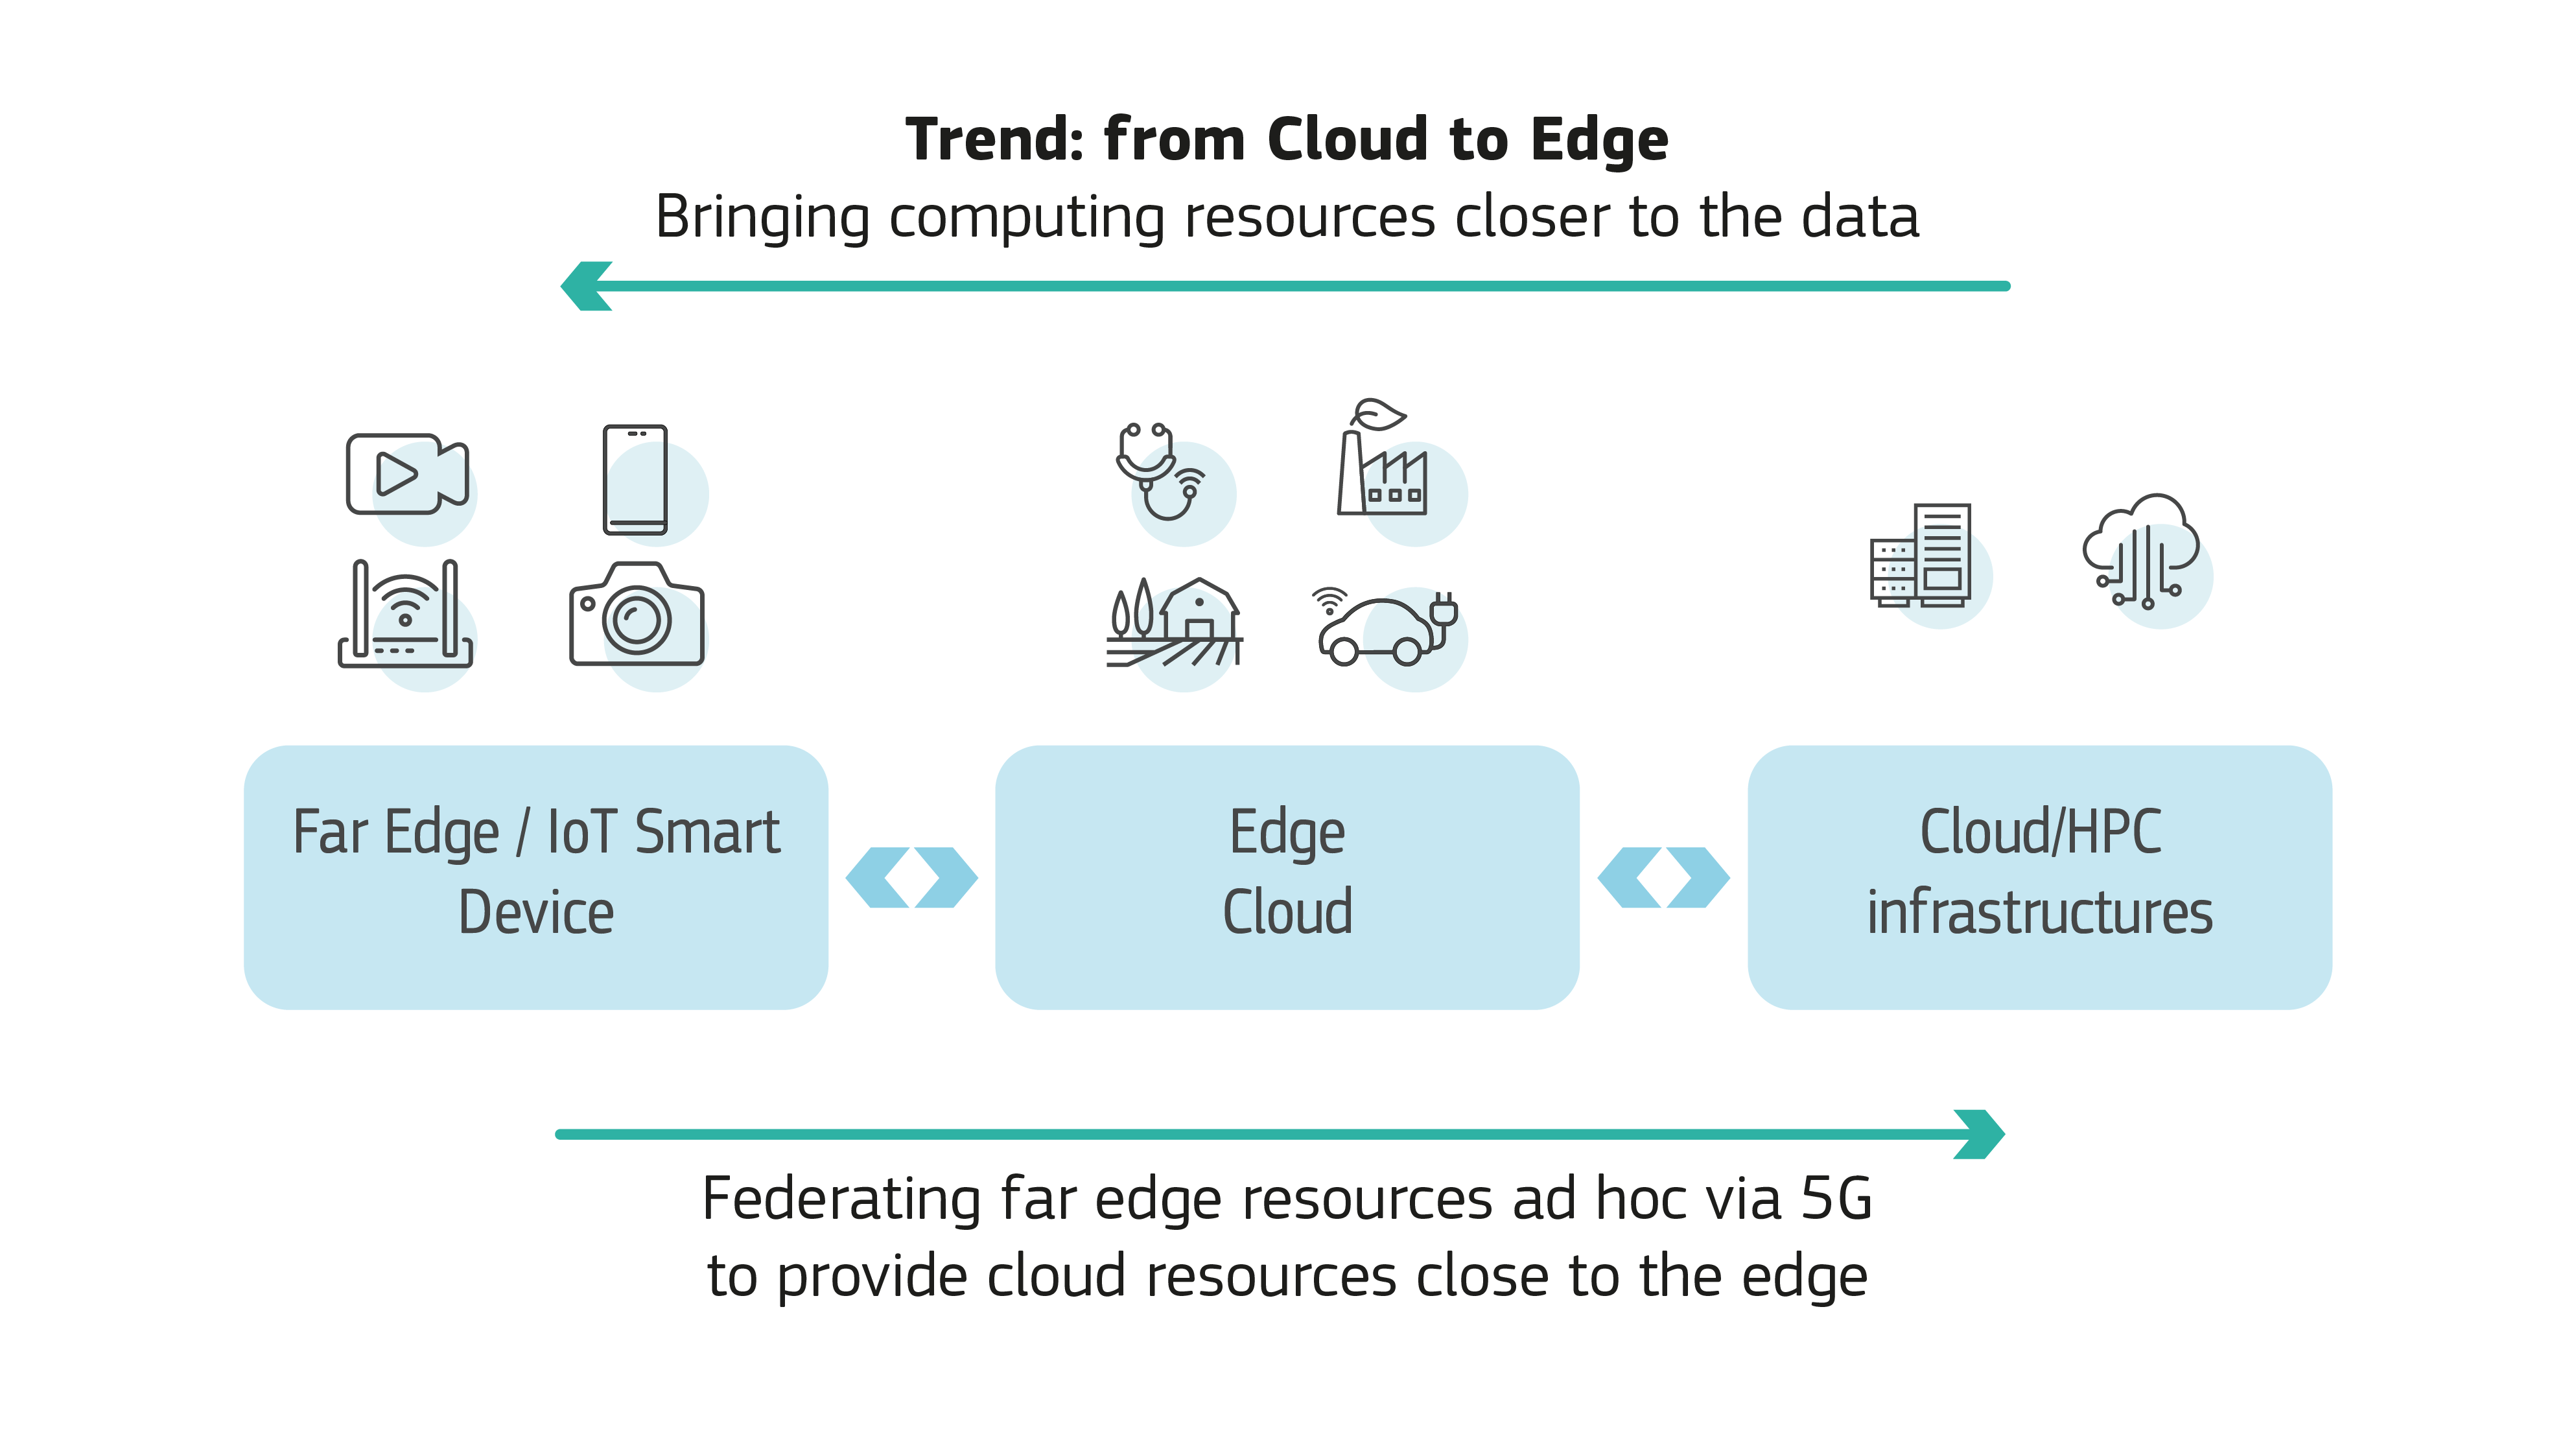 From cloud to edge diagram: bringing resources closer to data